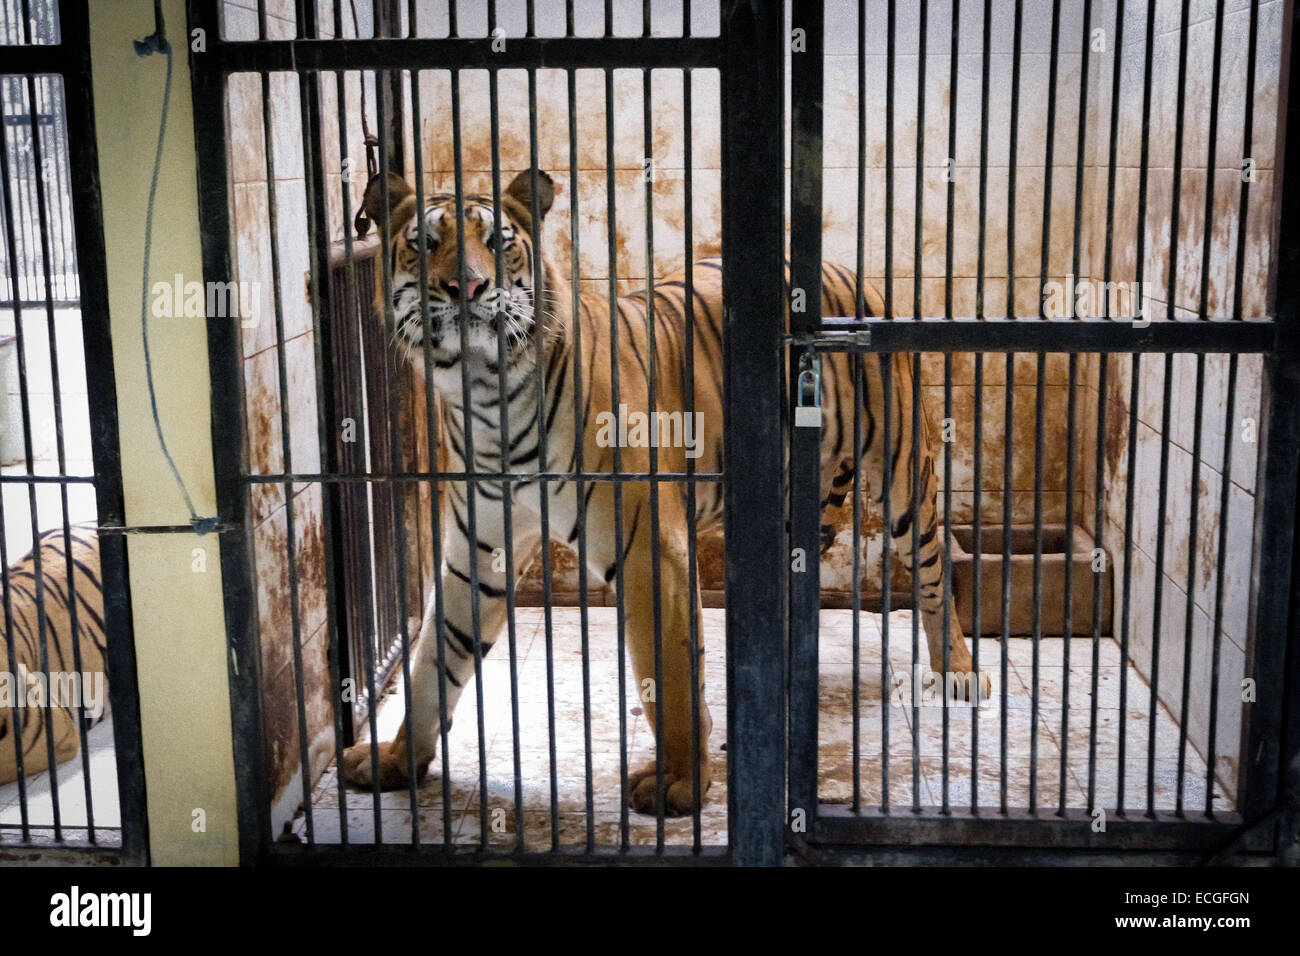 A Bengal tiger in captivity. Stock Photo